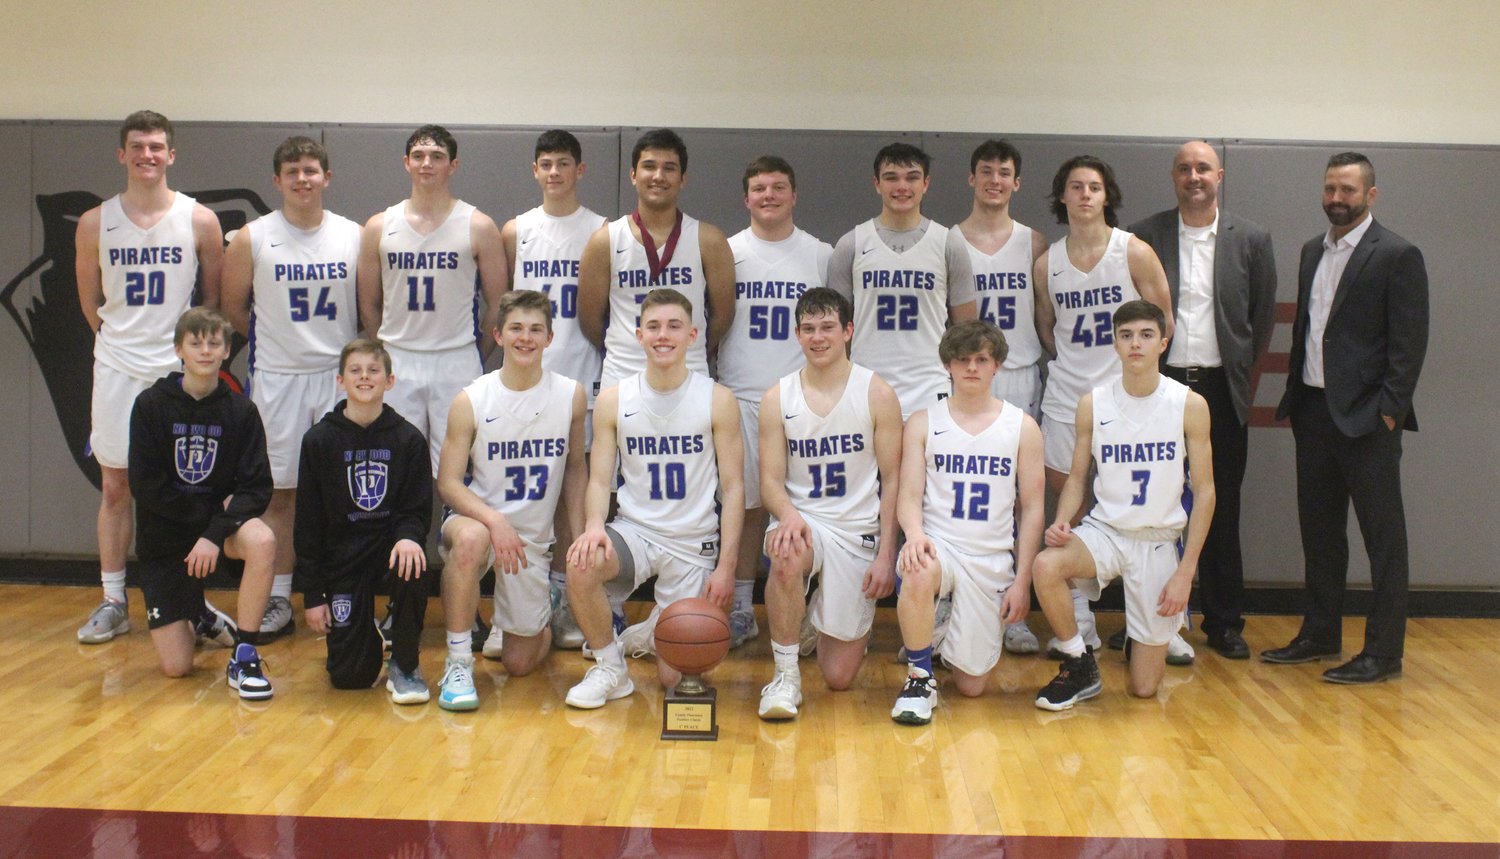 The Norwood Pirates basketball team after rallying to defeat Marshfield in the Family Pharmacy Panther Classic held in Mountain Grove.